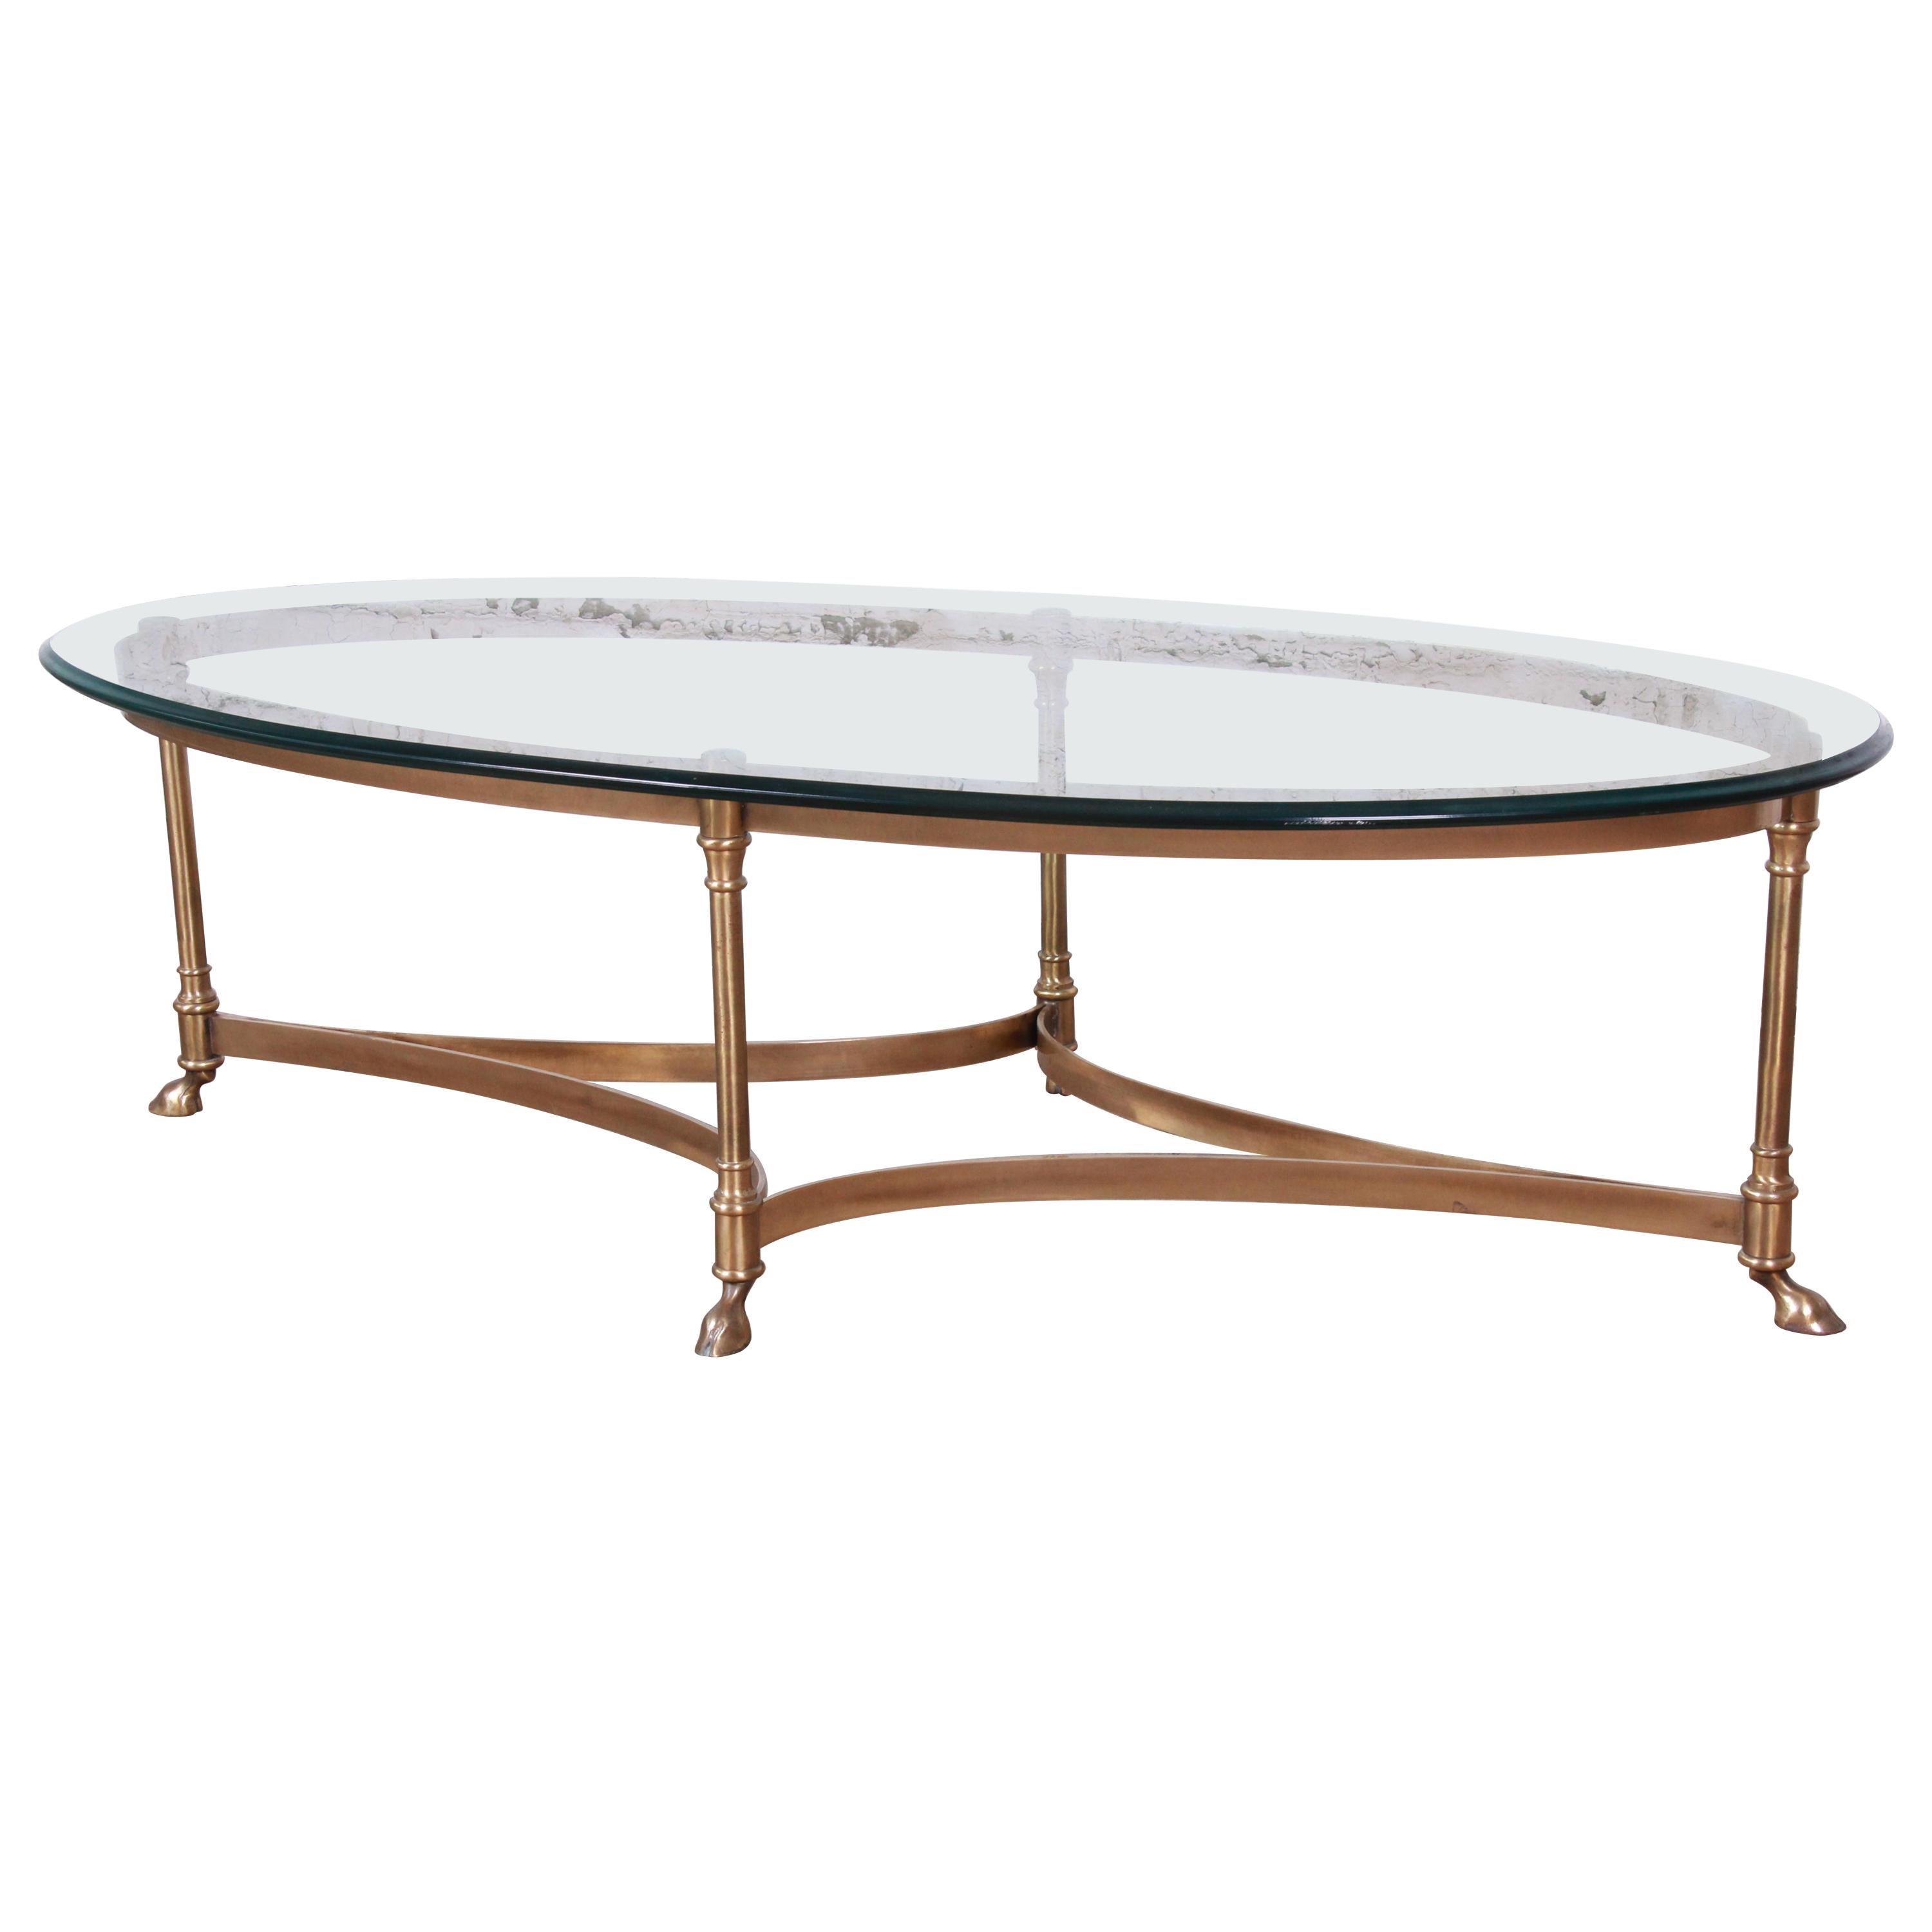 Labarge Midcentury Hollywood Regency Brass and Glass Hooved Feet Cocktail Table